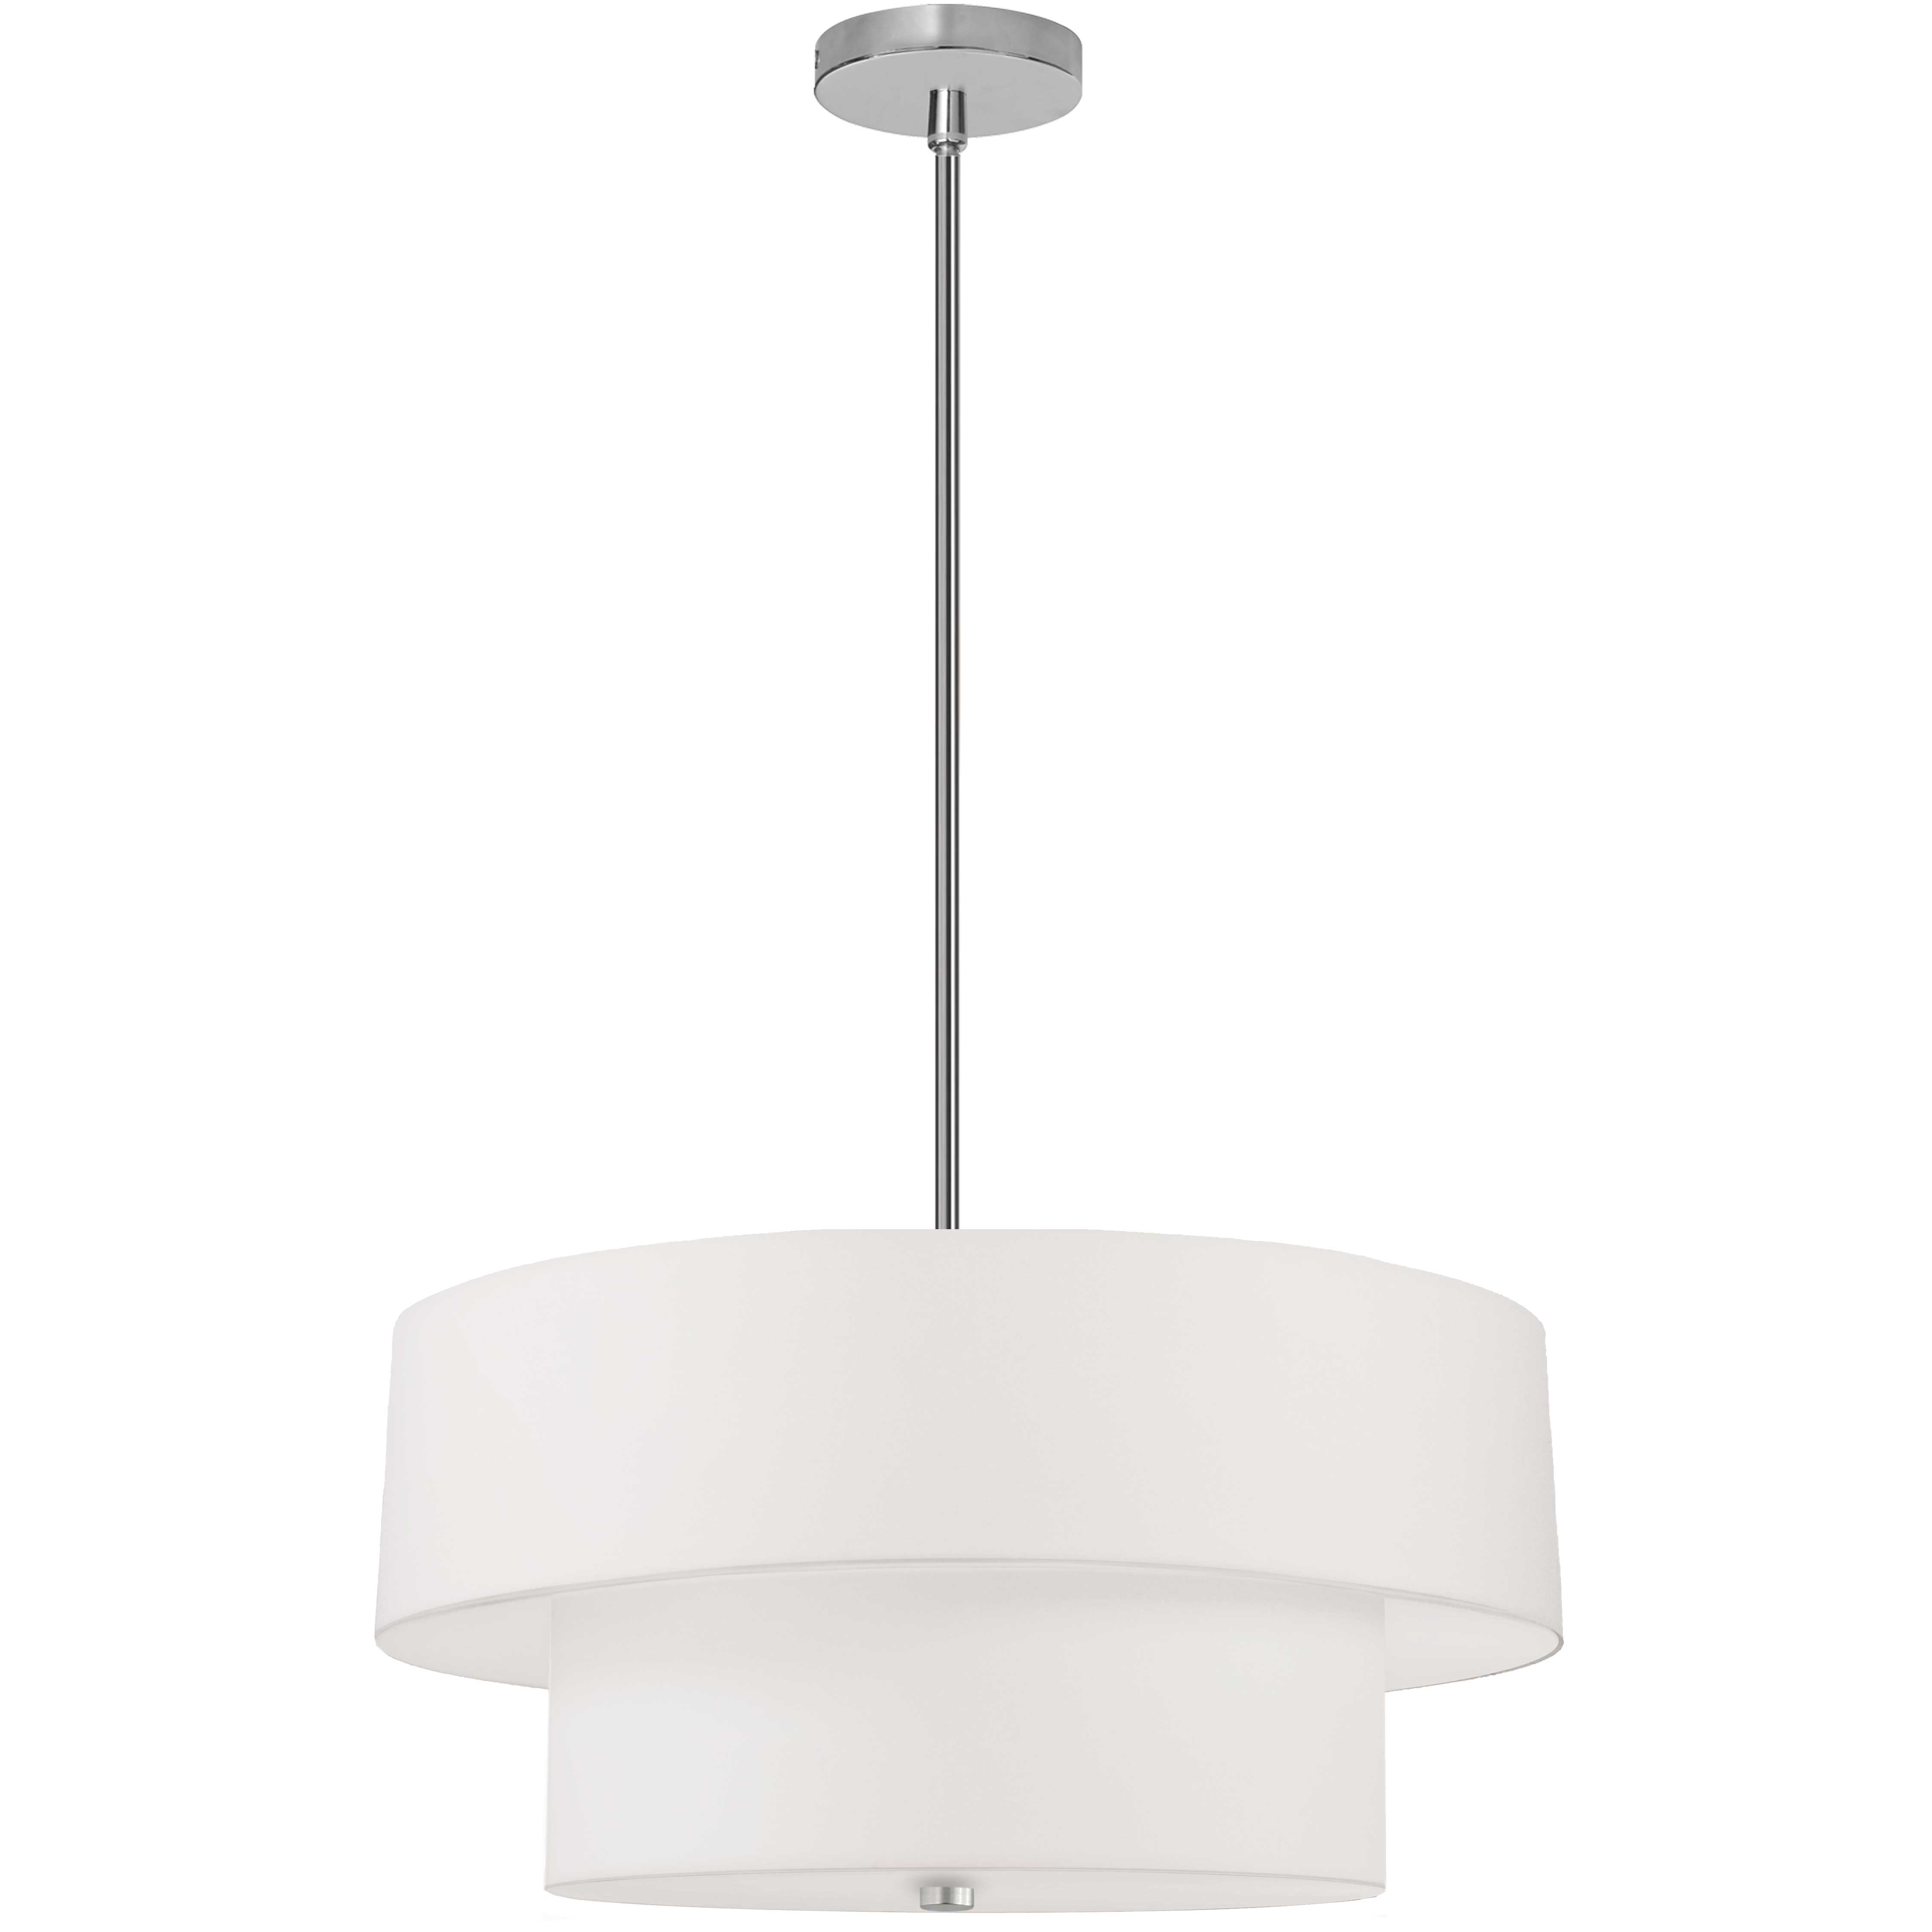 Mid-century, modern or contemporary, the Everly family of lighting will add a fashionable presence to your home décor. The pendant design comes in a one or two tier construction. The metal frame drops to a relatively narrow drum shade, with a contrasting inner shade. From the metal frame to inner and outer shades, color options range from monochromatic to dramatic contrast. With its elegant proportions, the Everly family of lighting brings an element of luxury to foyers, living rooms or kitchens.